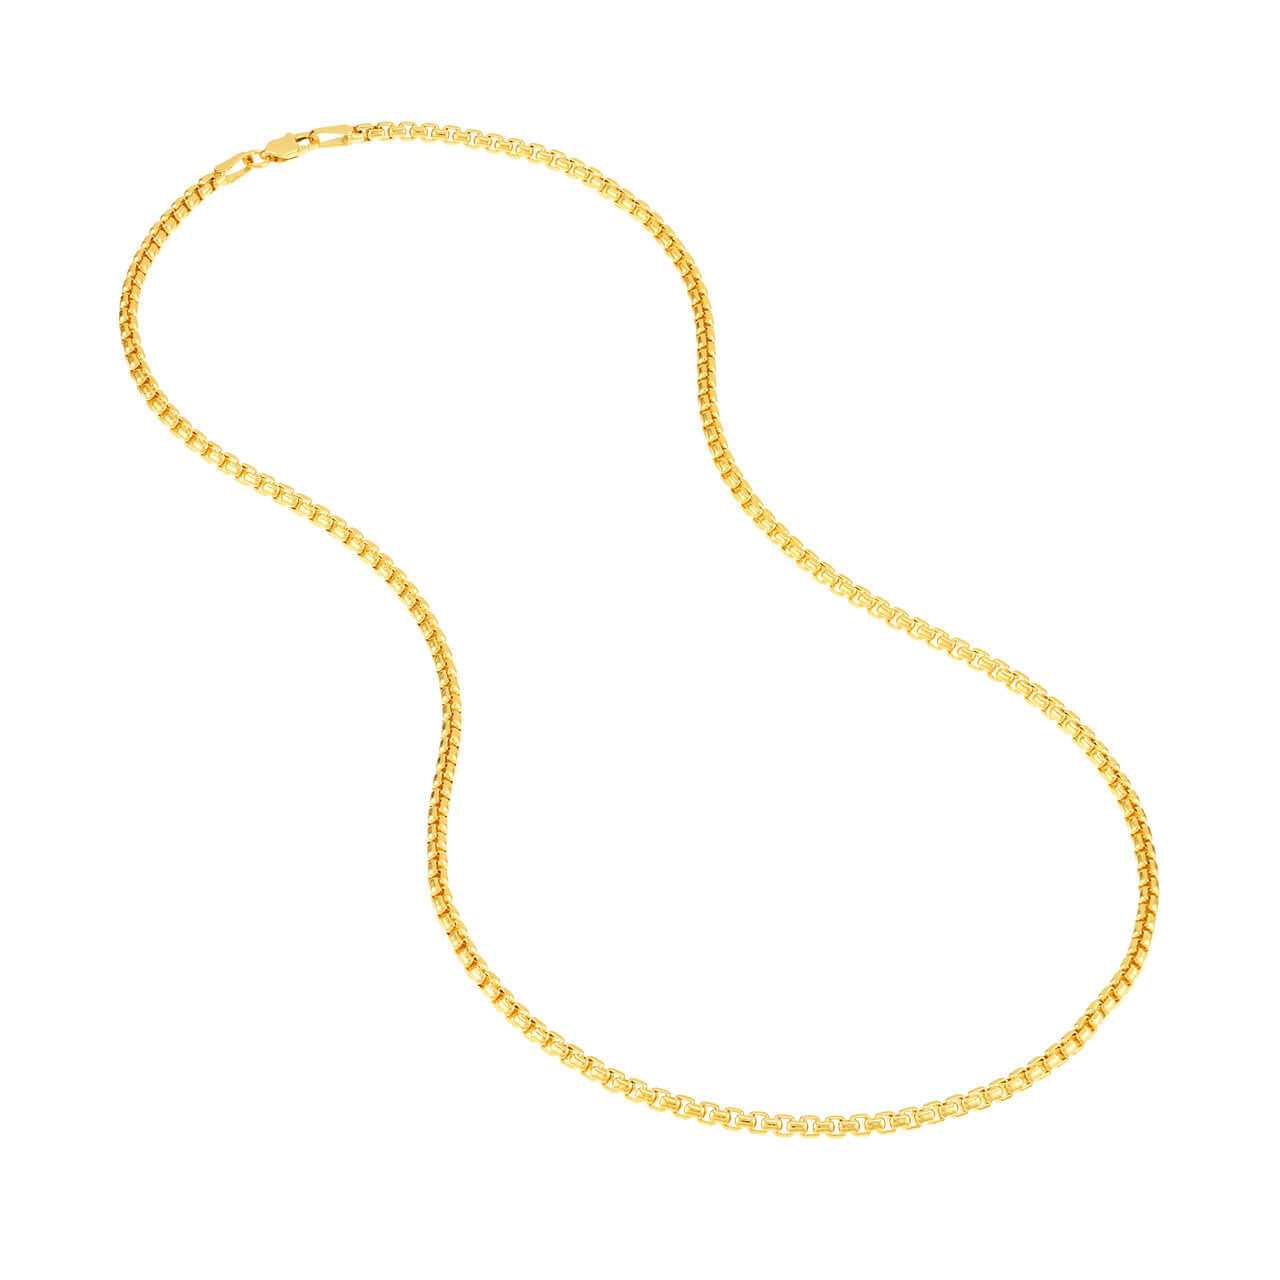 Yellow Gold Rounded Box Chain | Lisa Robin